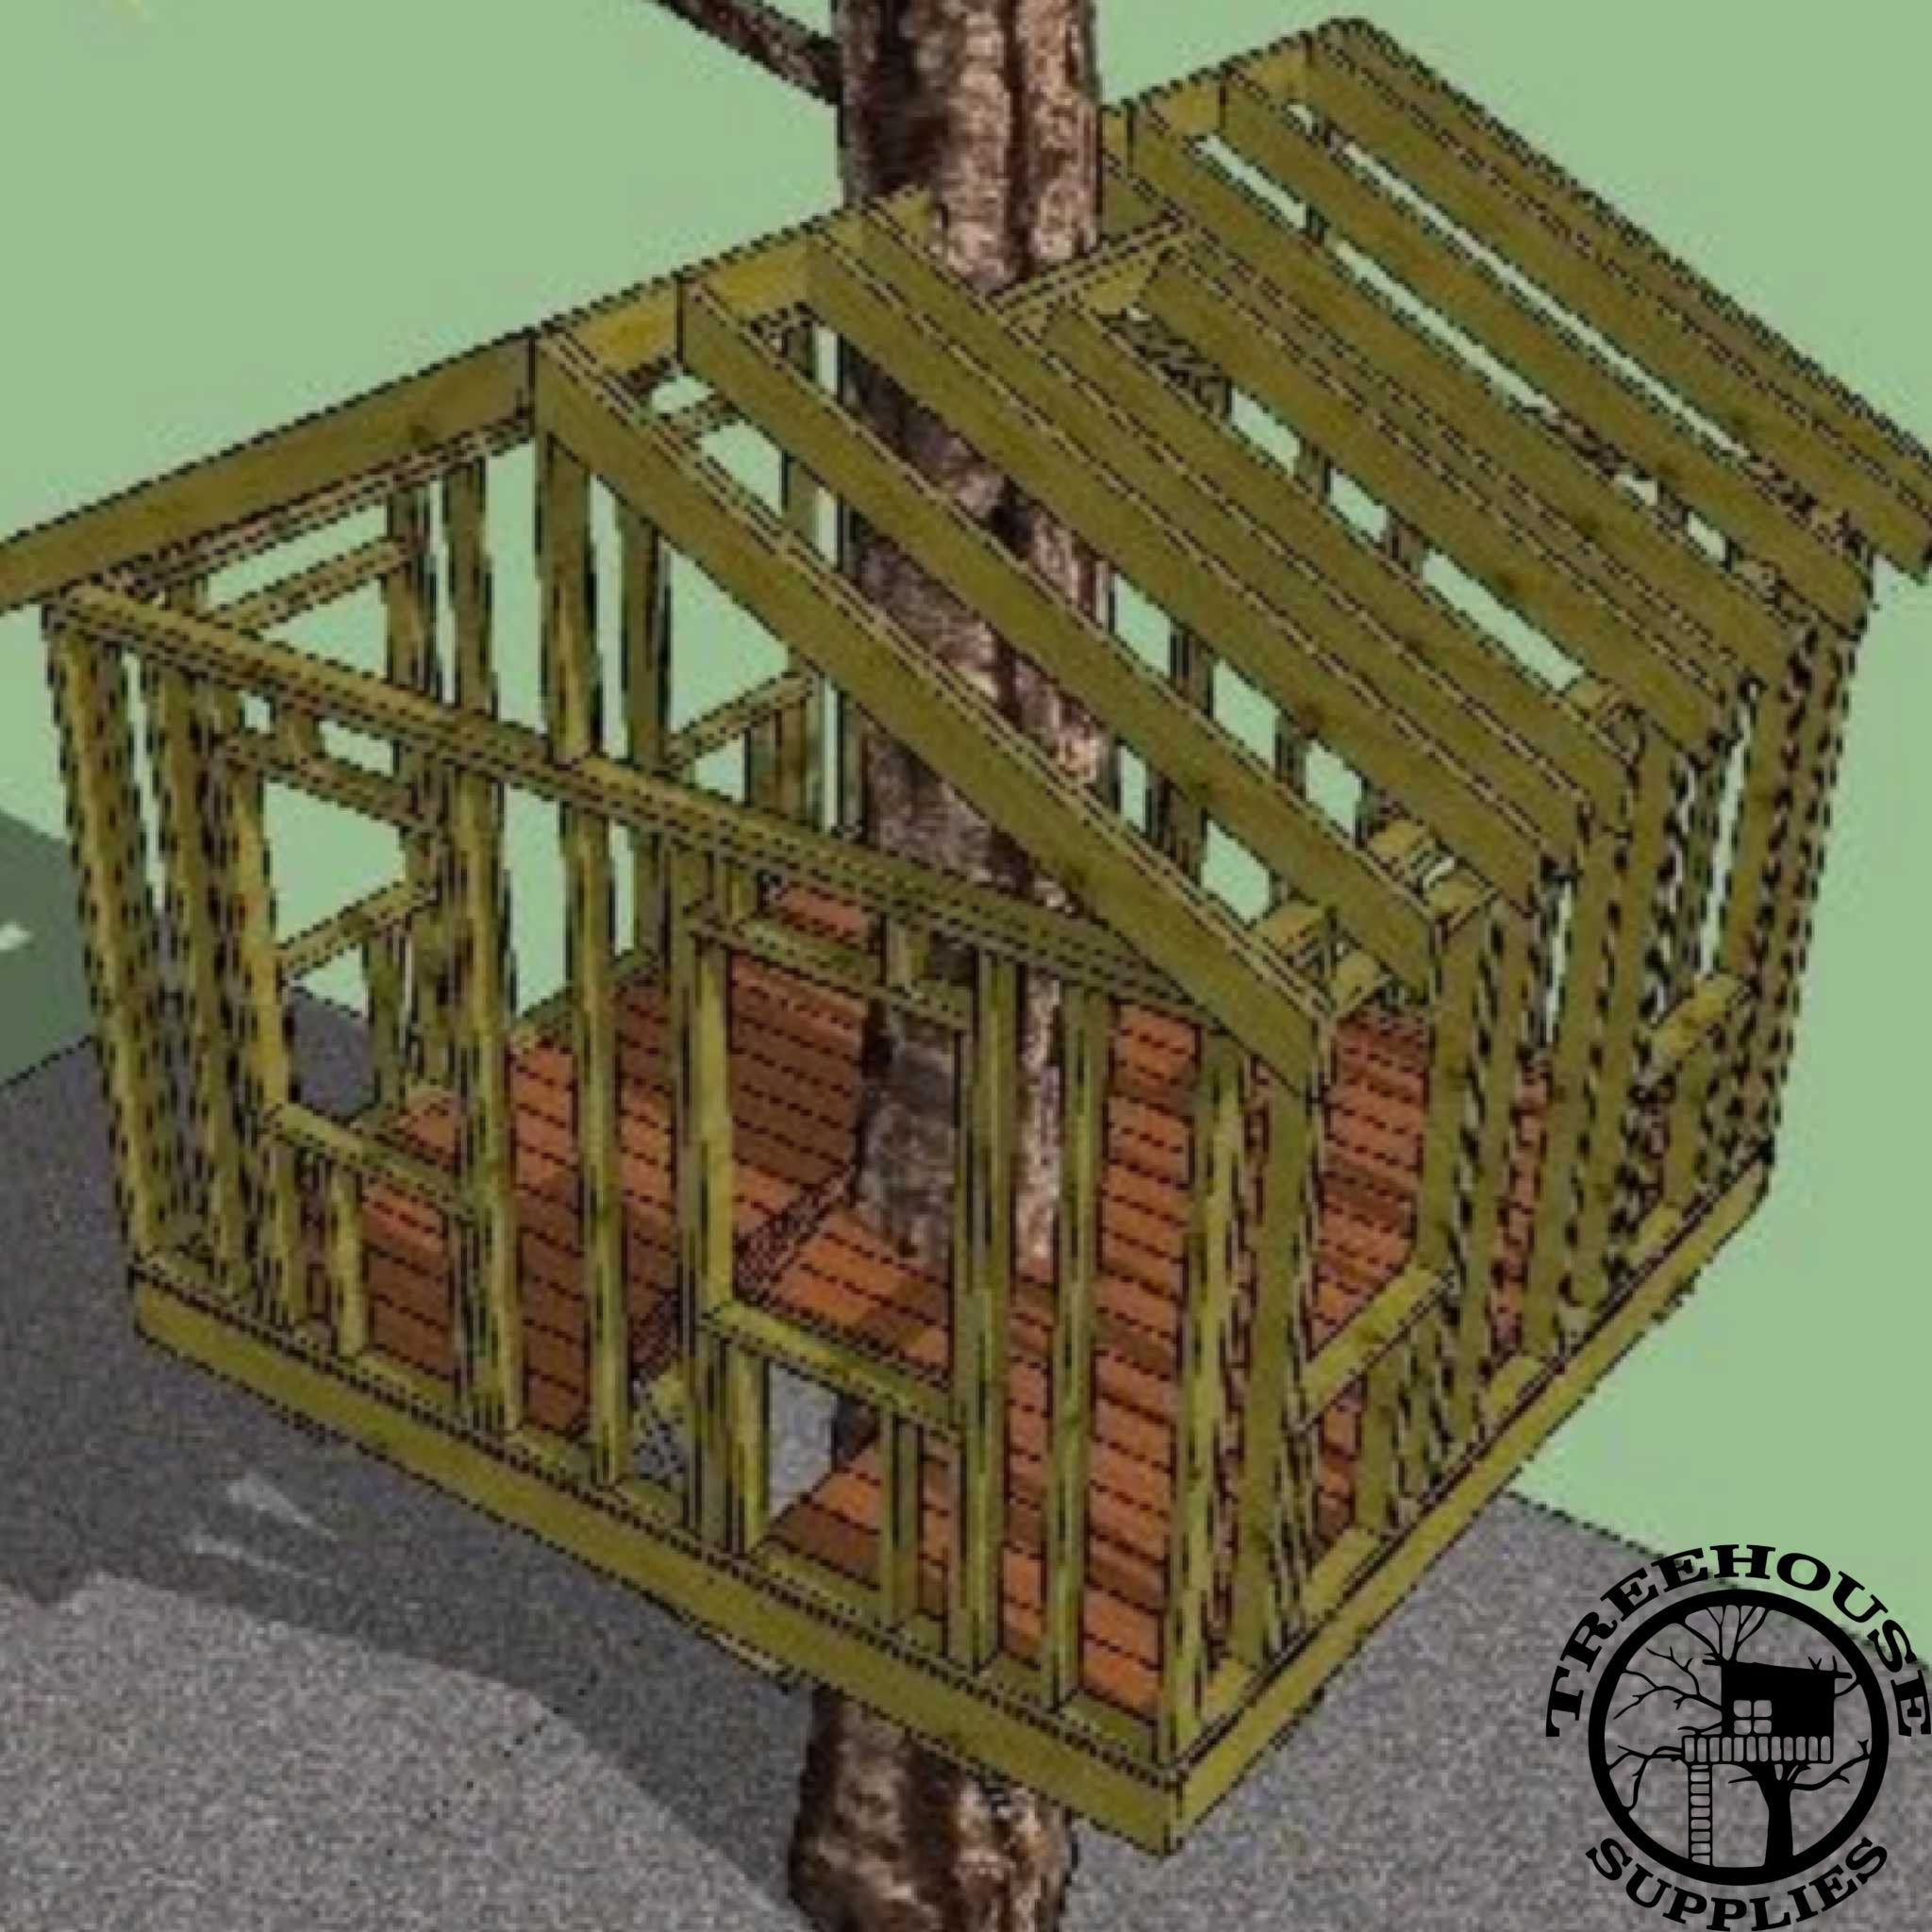 10' SQUARE TREEHOUSE PLAN - NOW INCLUDES STEP-BY-STEP 3D MODELING!! - Treehouse Supplies